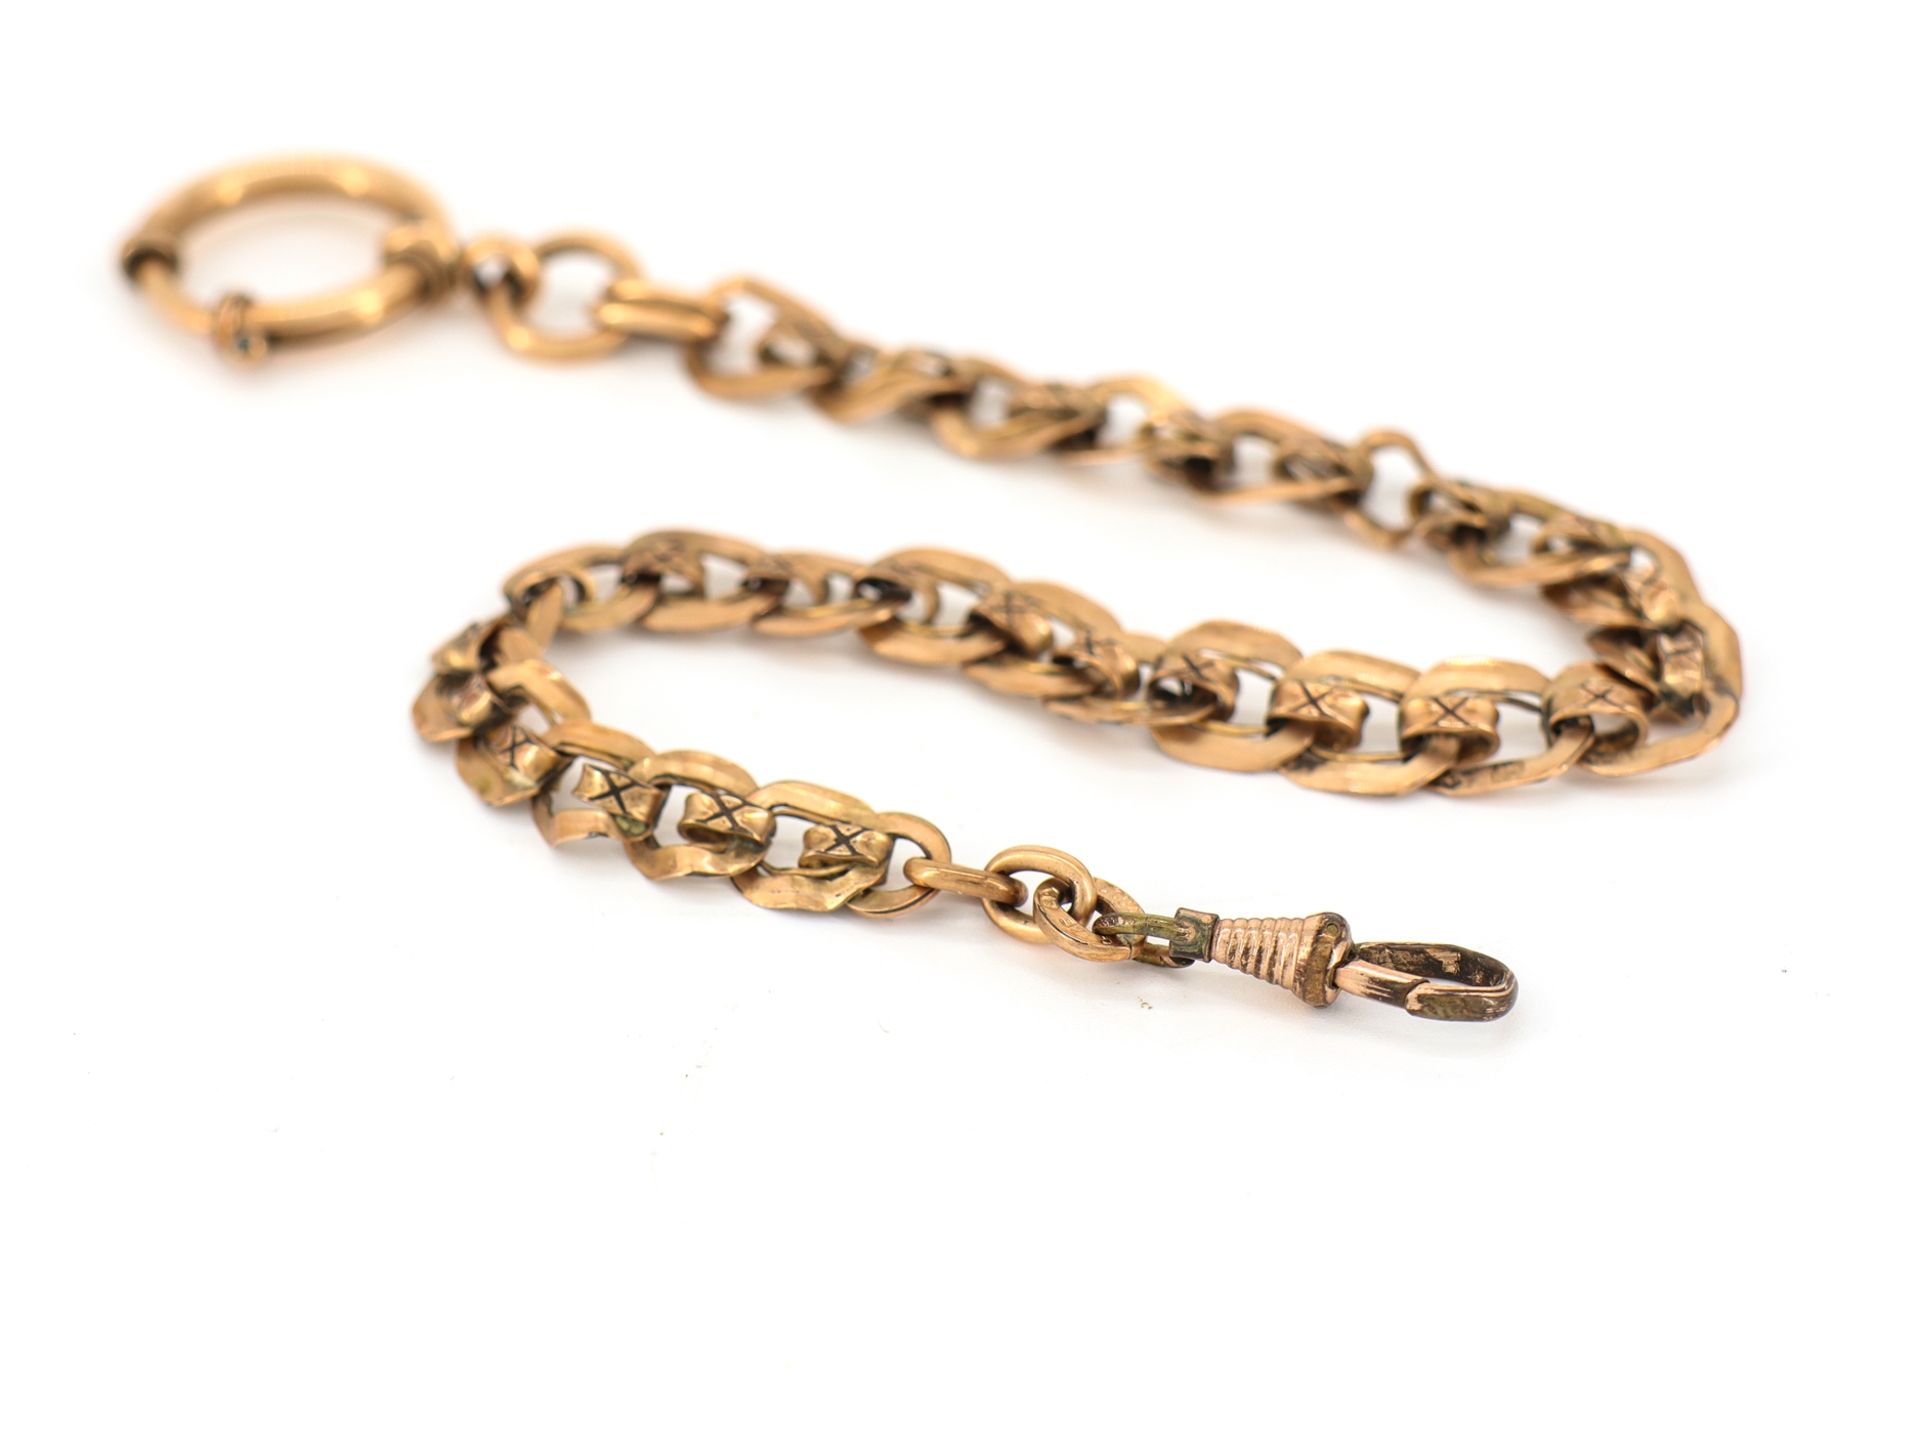 Gold-plated watch chain, around 1890 - Image 2 of 5